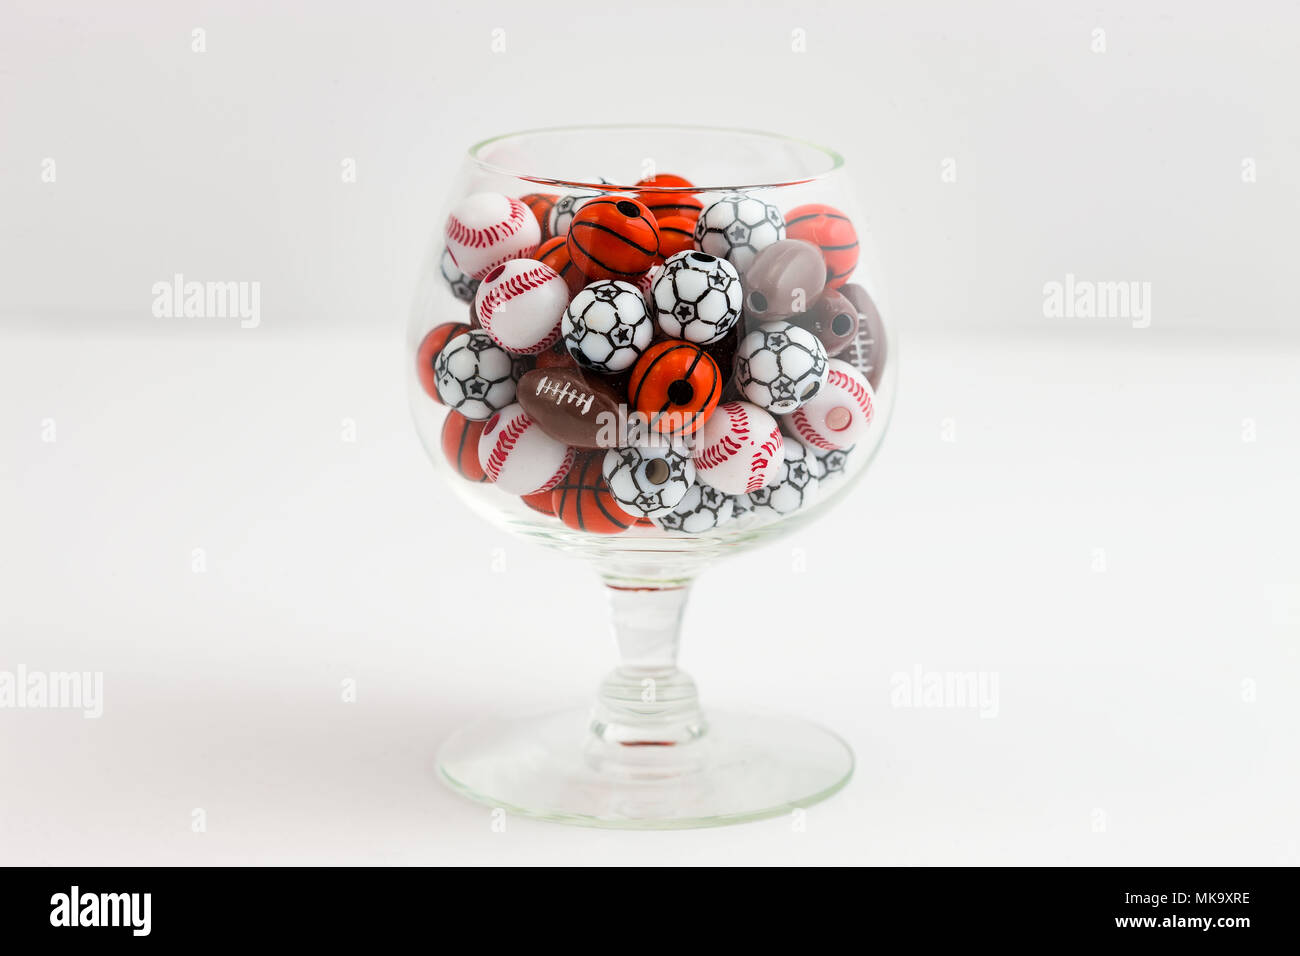 a glass of beads used to make sports related jewelry Stock Photo